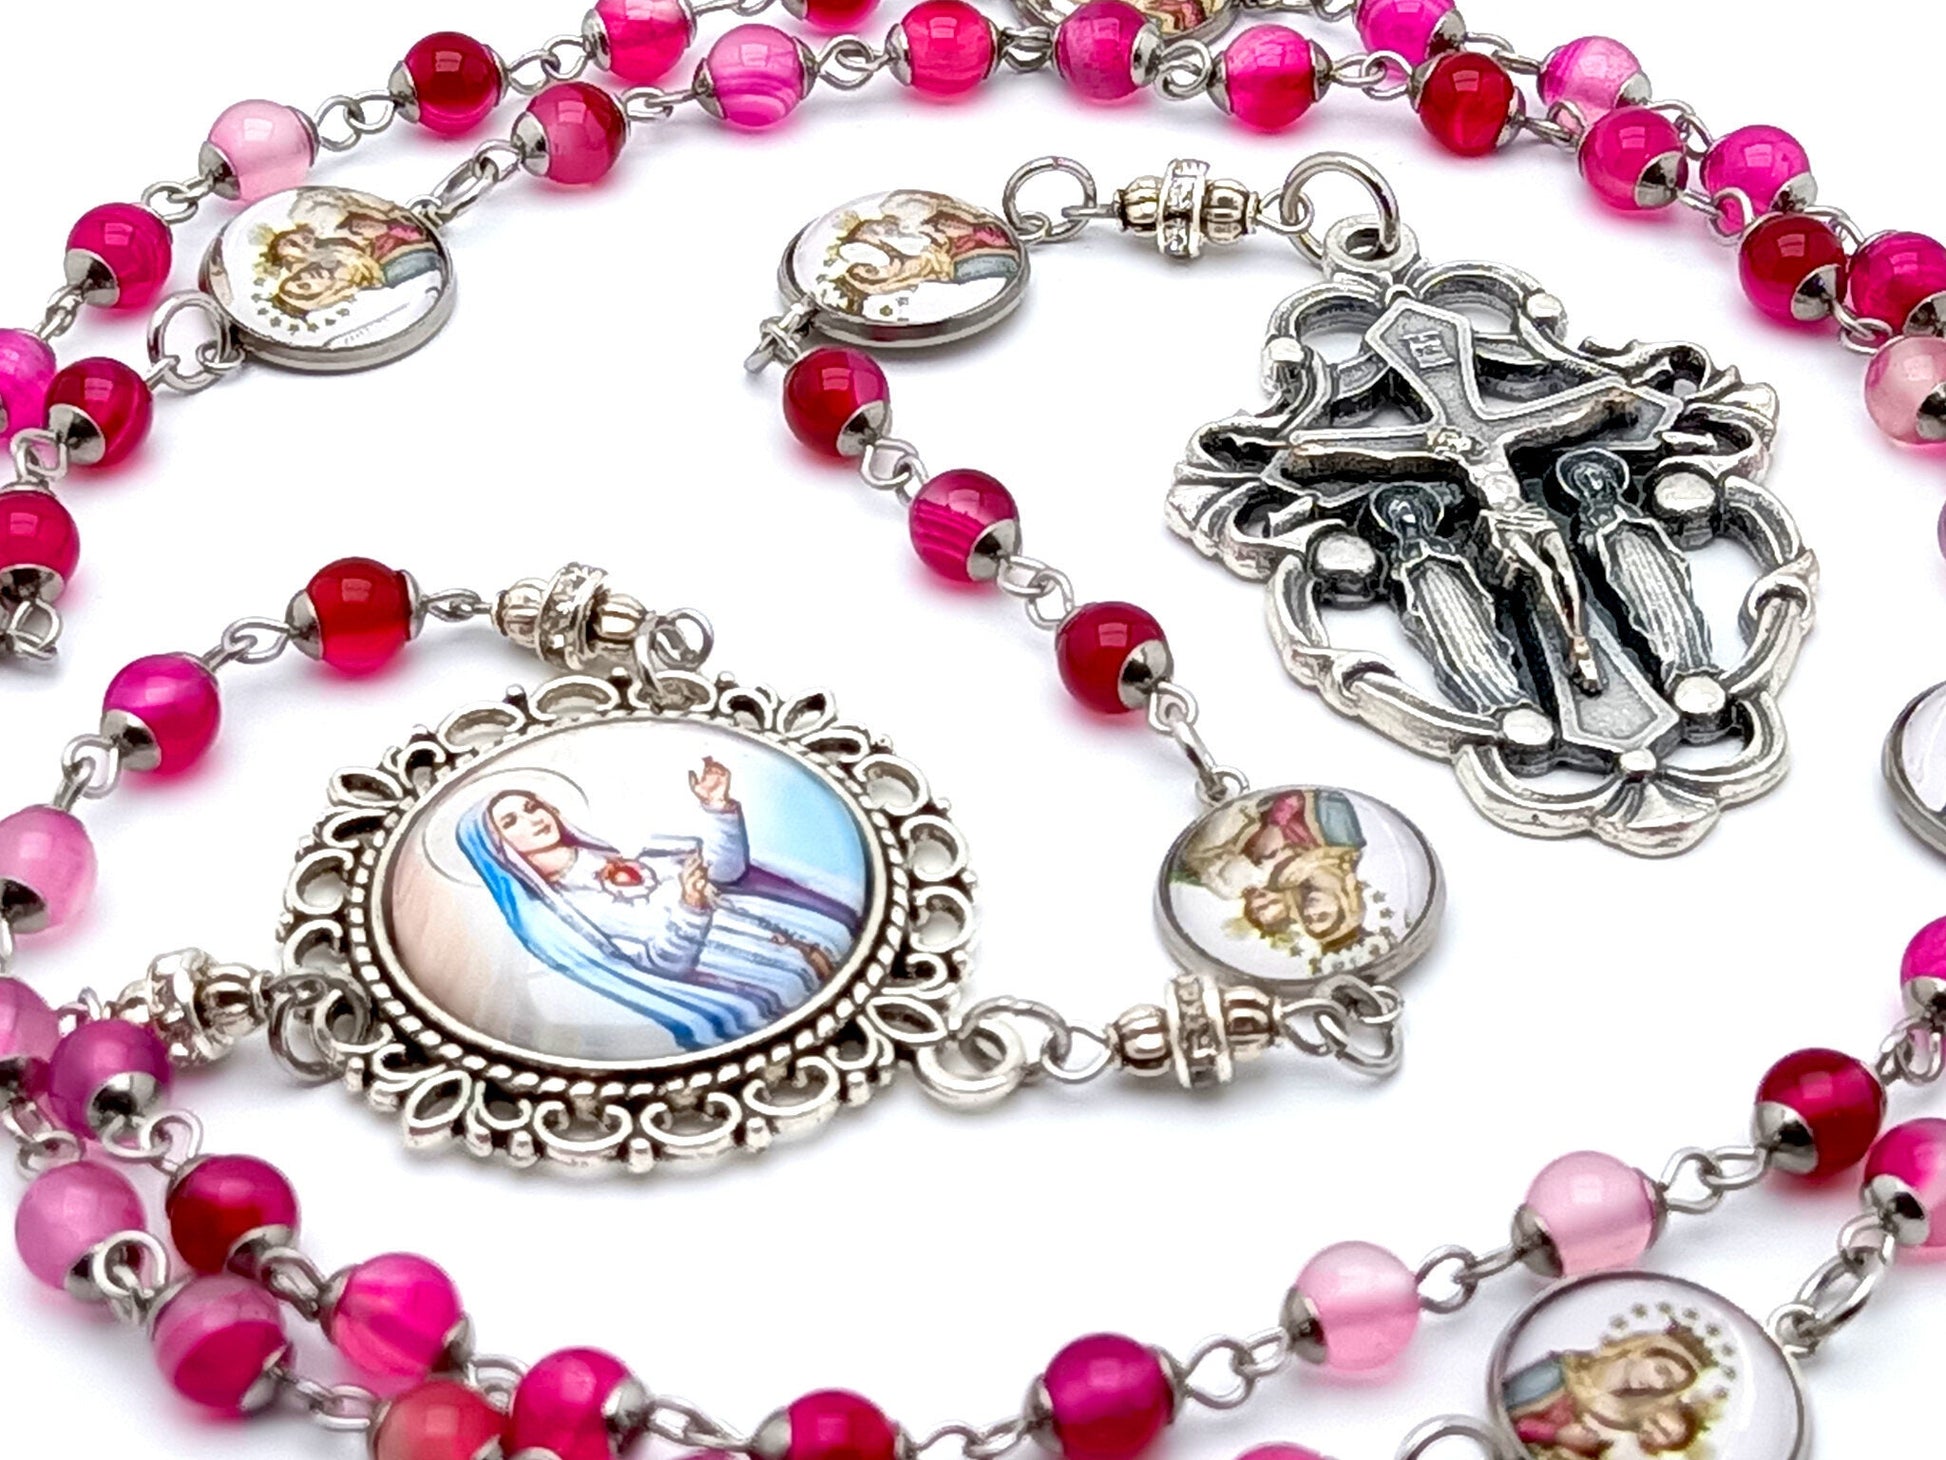 Immaculate Heart of Mary unique rosary beads with pink agate gemstone and picture medal beads, holy angel crucifix and picture centre medal.